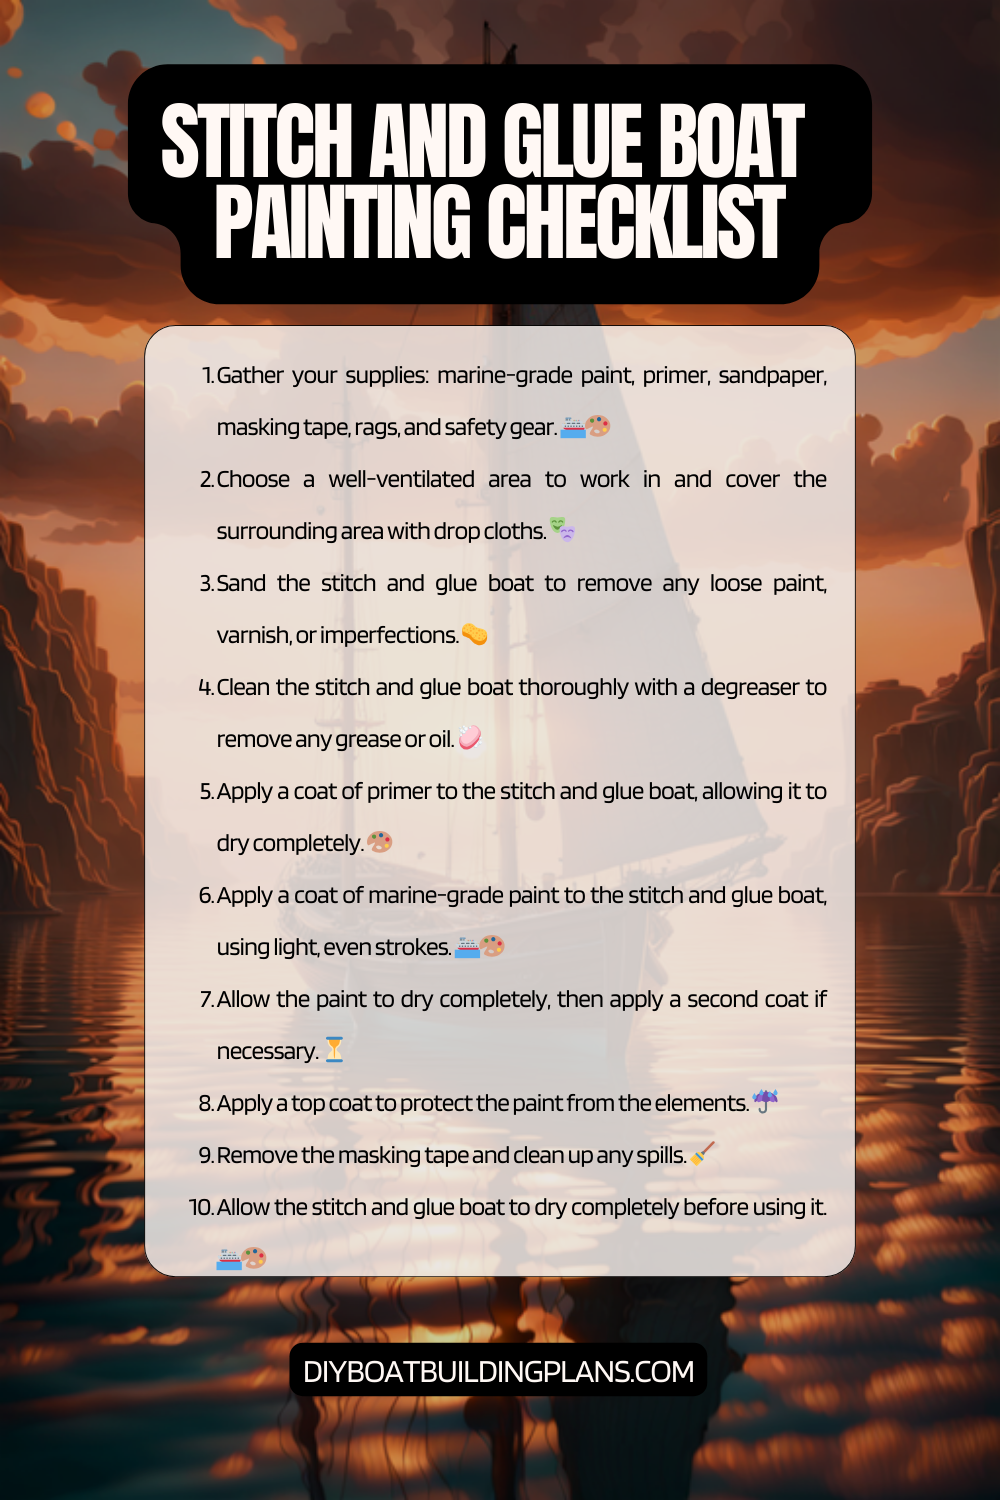 Stitch and Glue Boat Painting Checklist